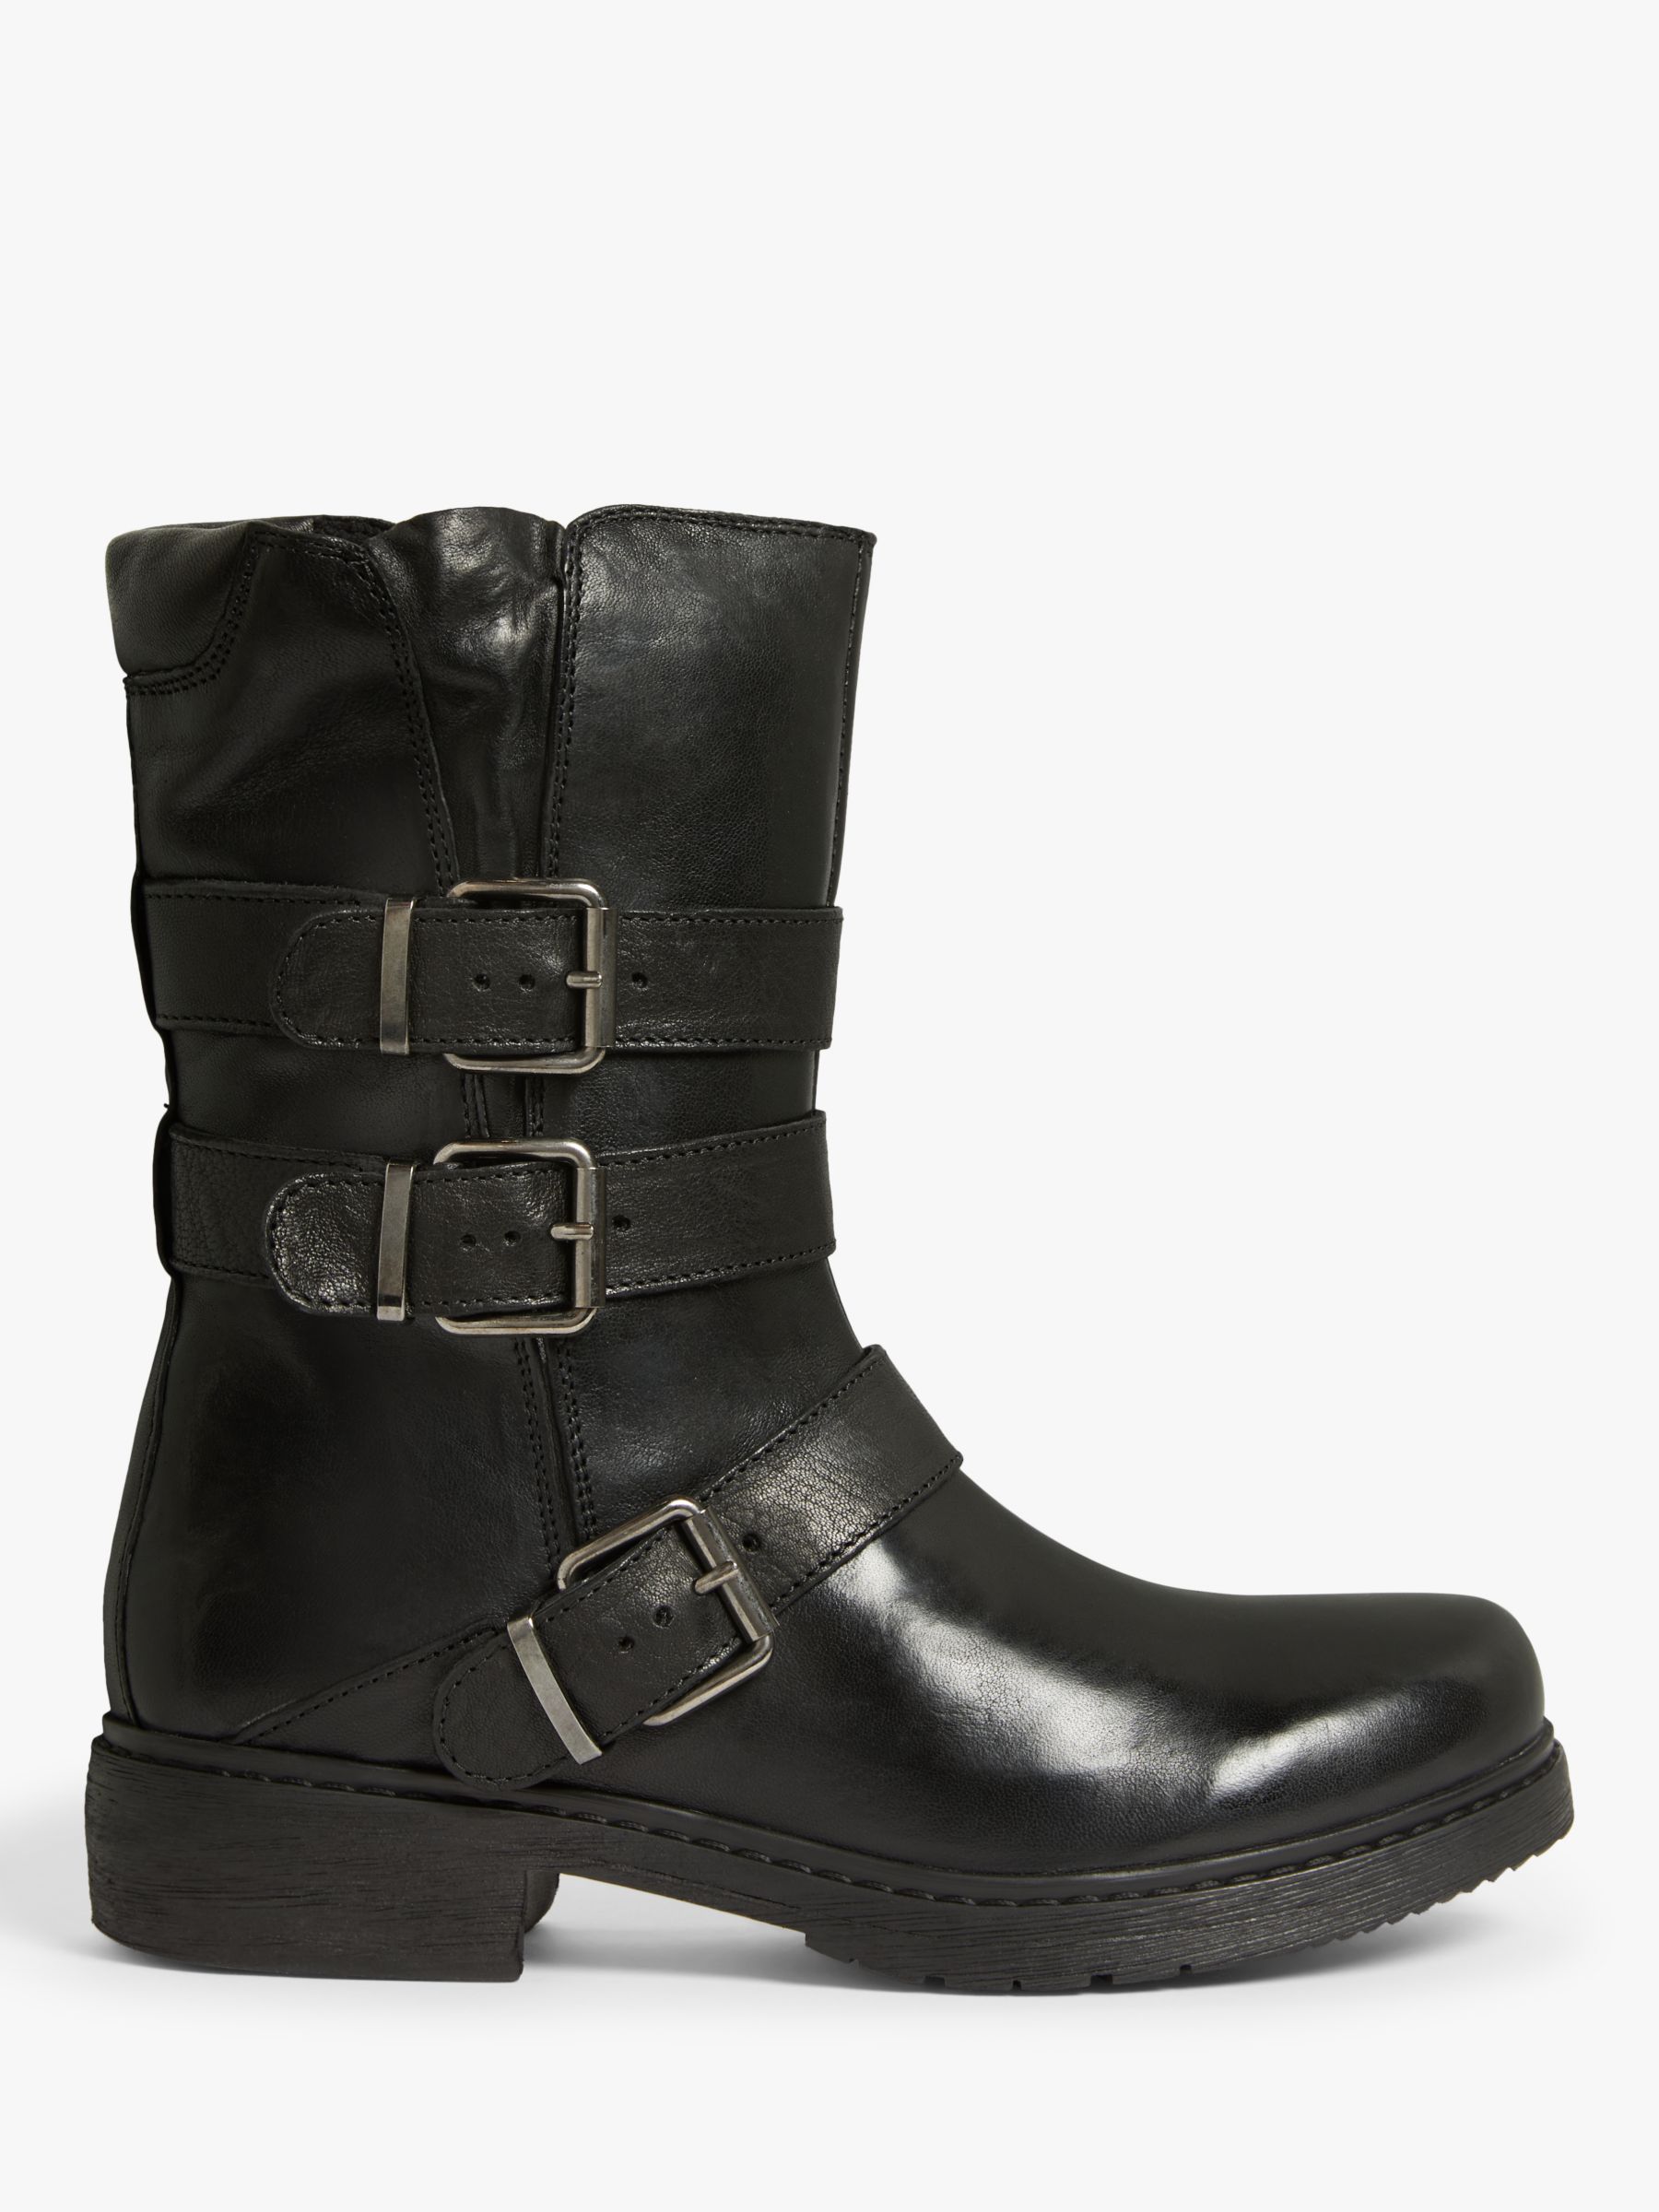 John Lewis Otter Buckle Leather Ankle Boots Black At John Lewis Partners